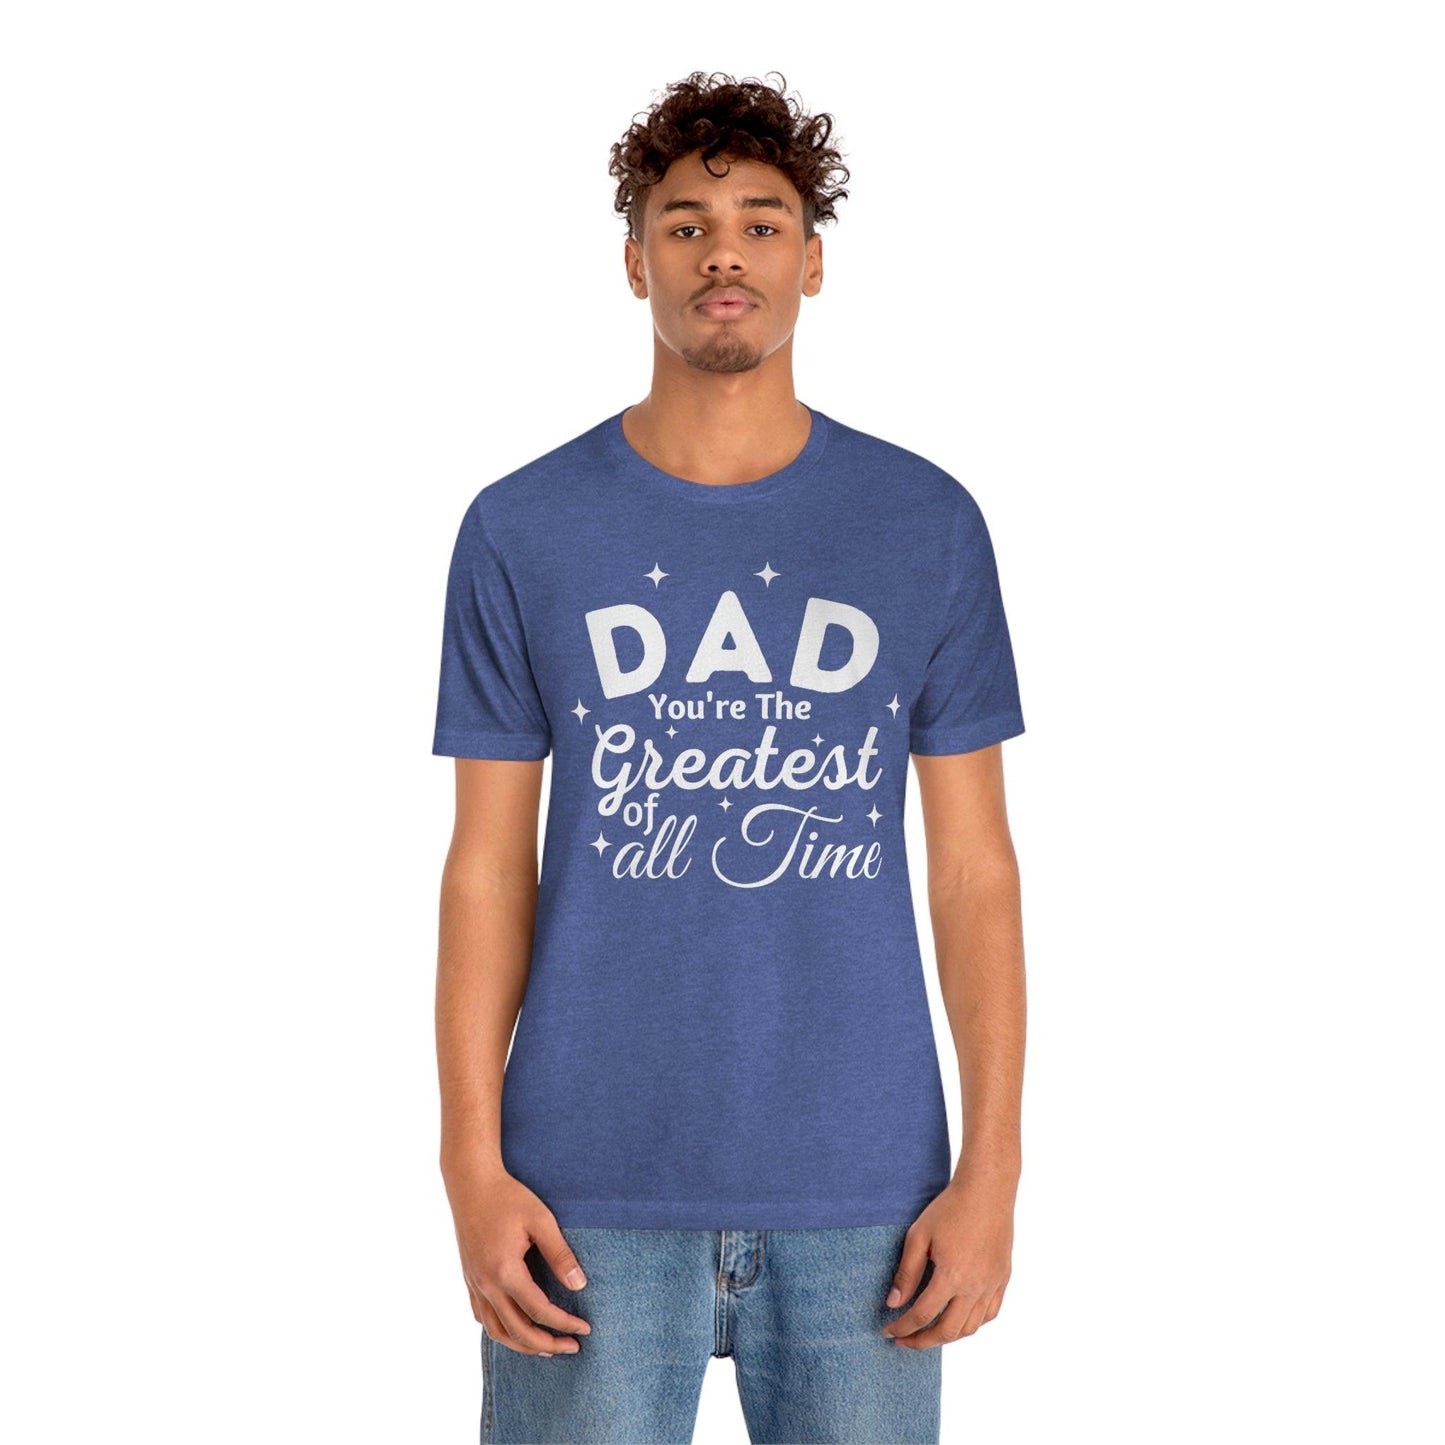 Dad Gift - Best Dad Gift - Dad You're the Greatest of all time Shirt - Dad Shirt - Funny Fathers Gift Dad Birthday Gift